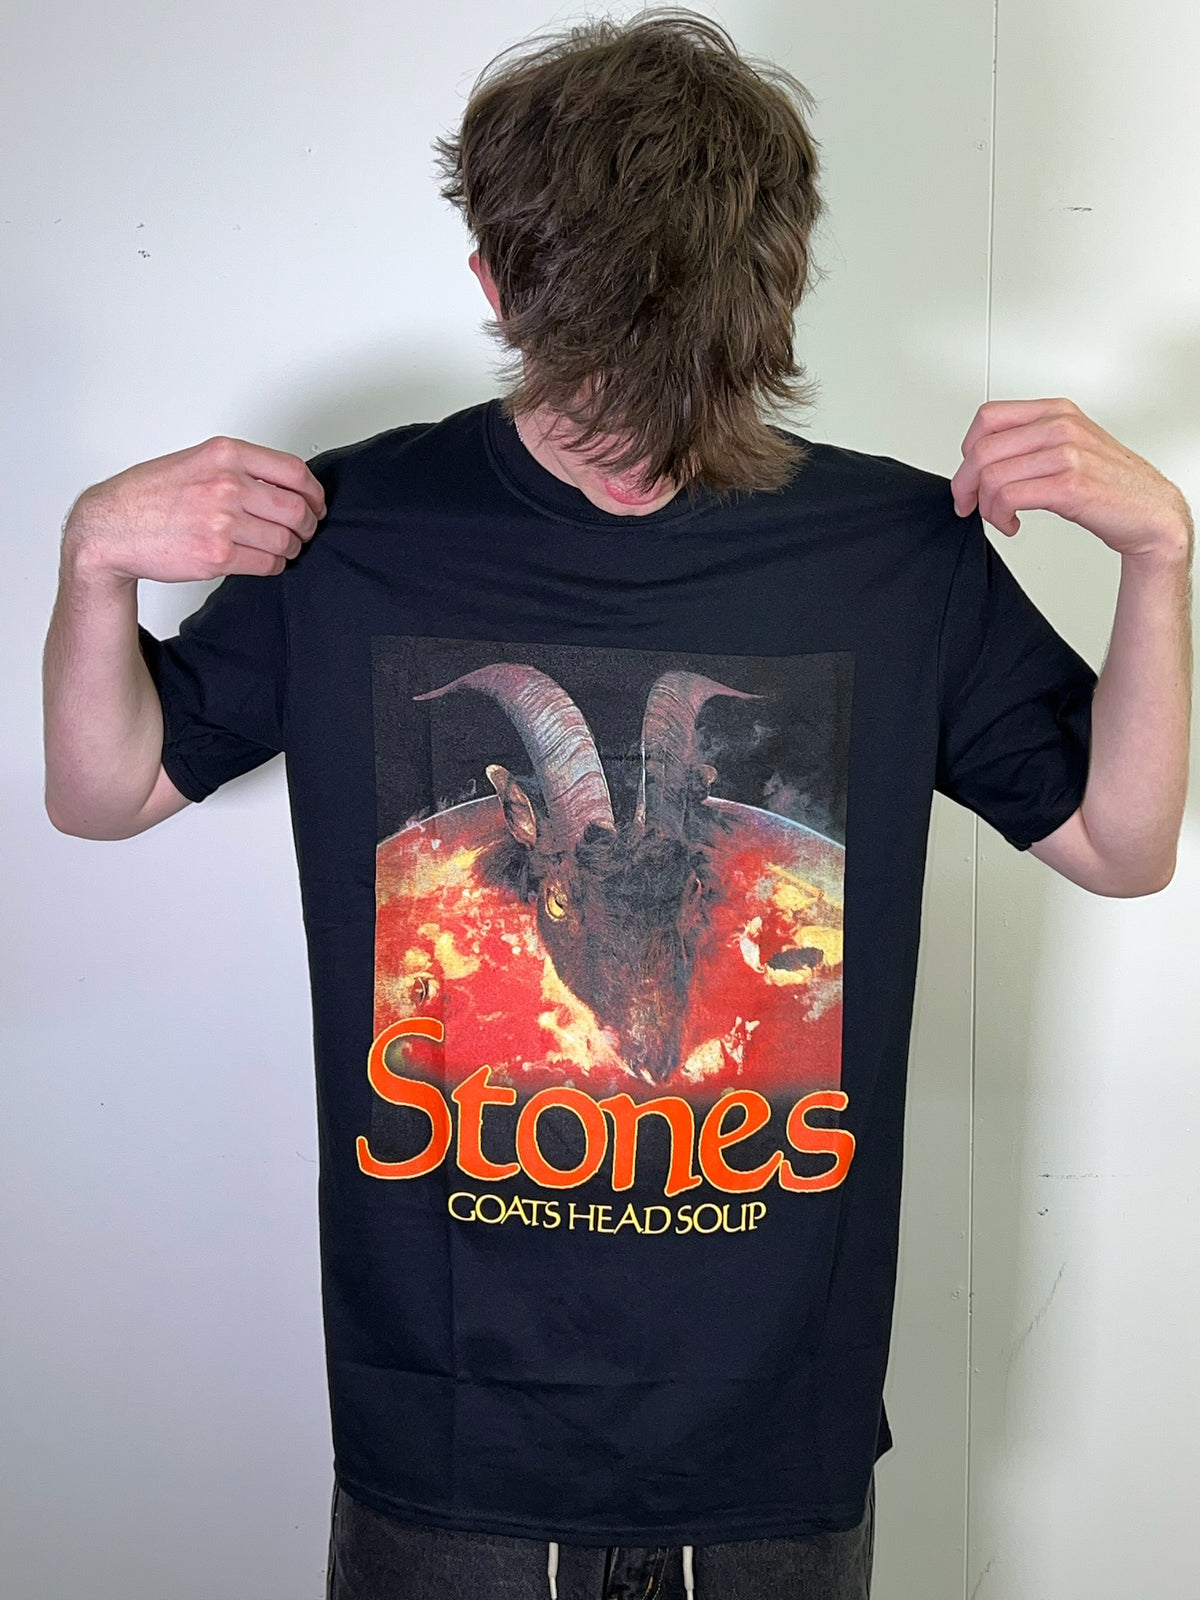 Rolling Stones Goats Head Soup with Logo Black Tee